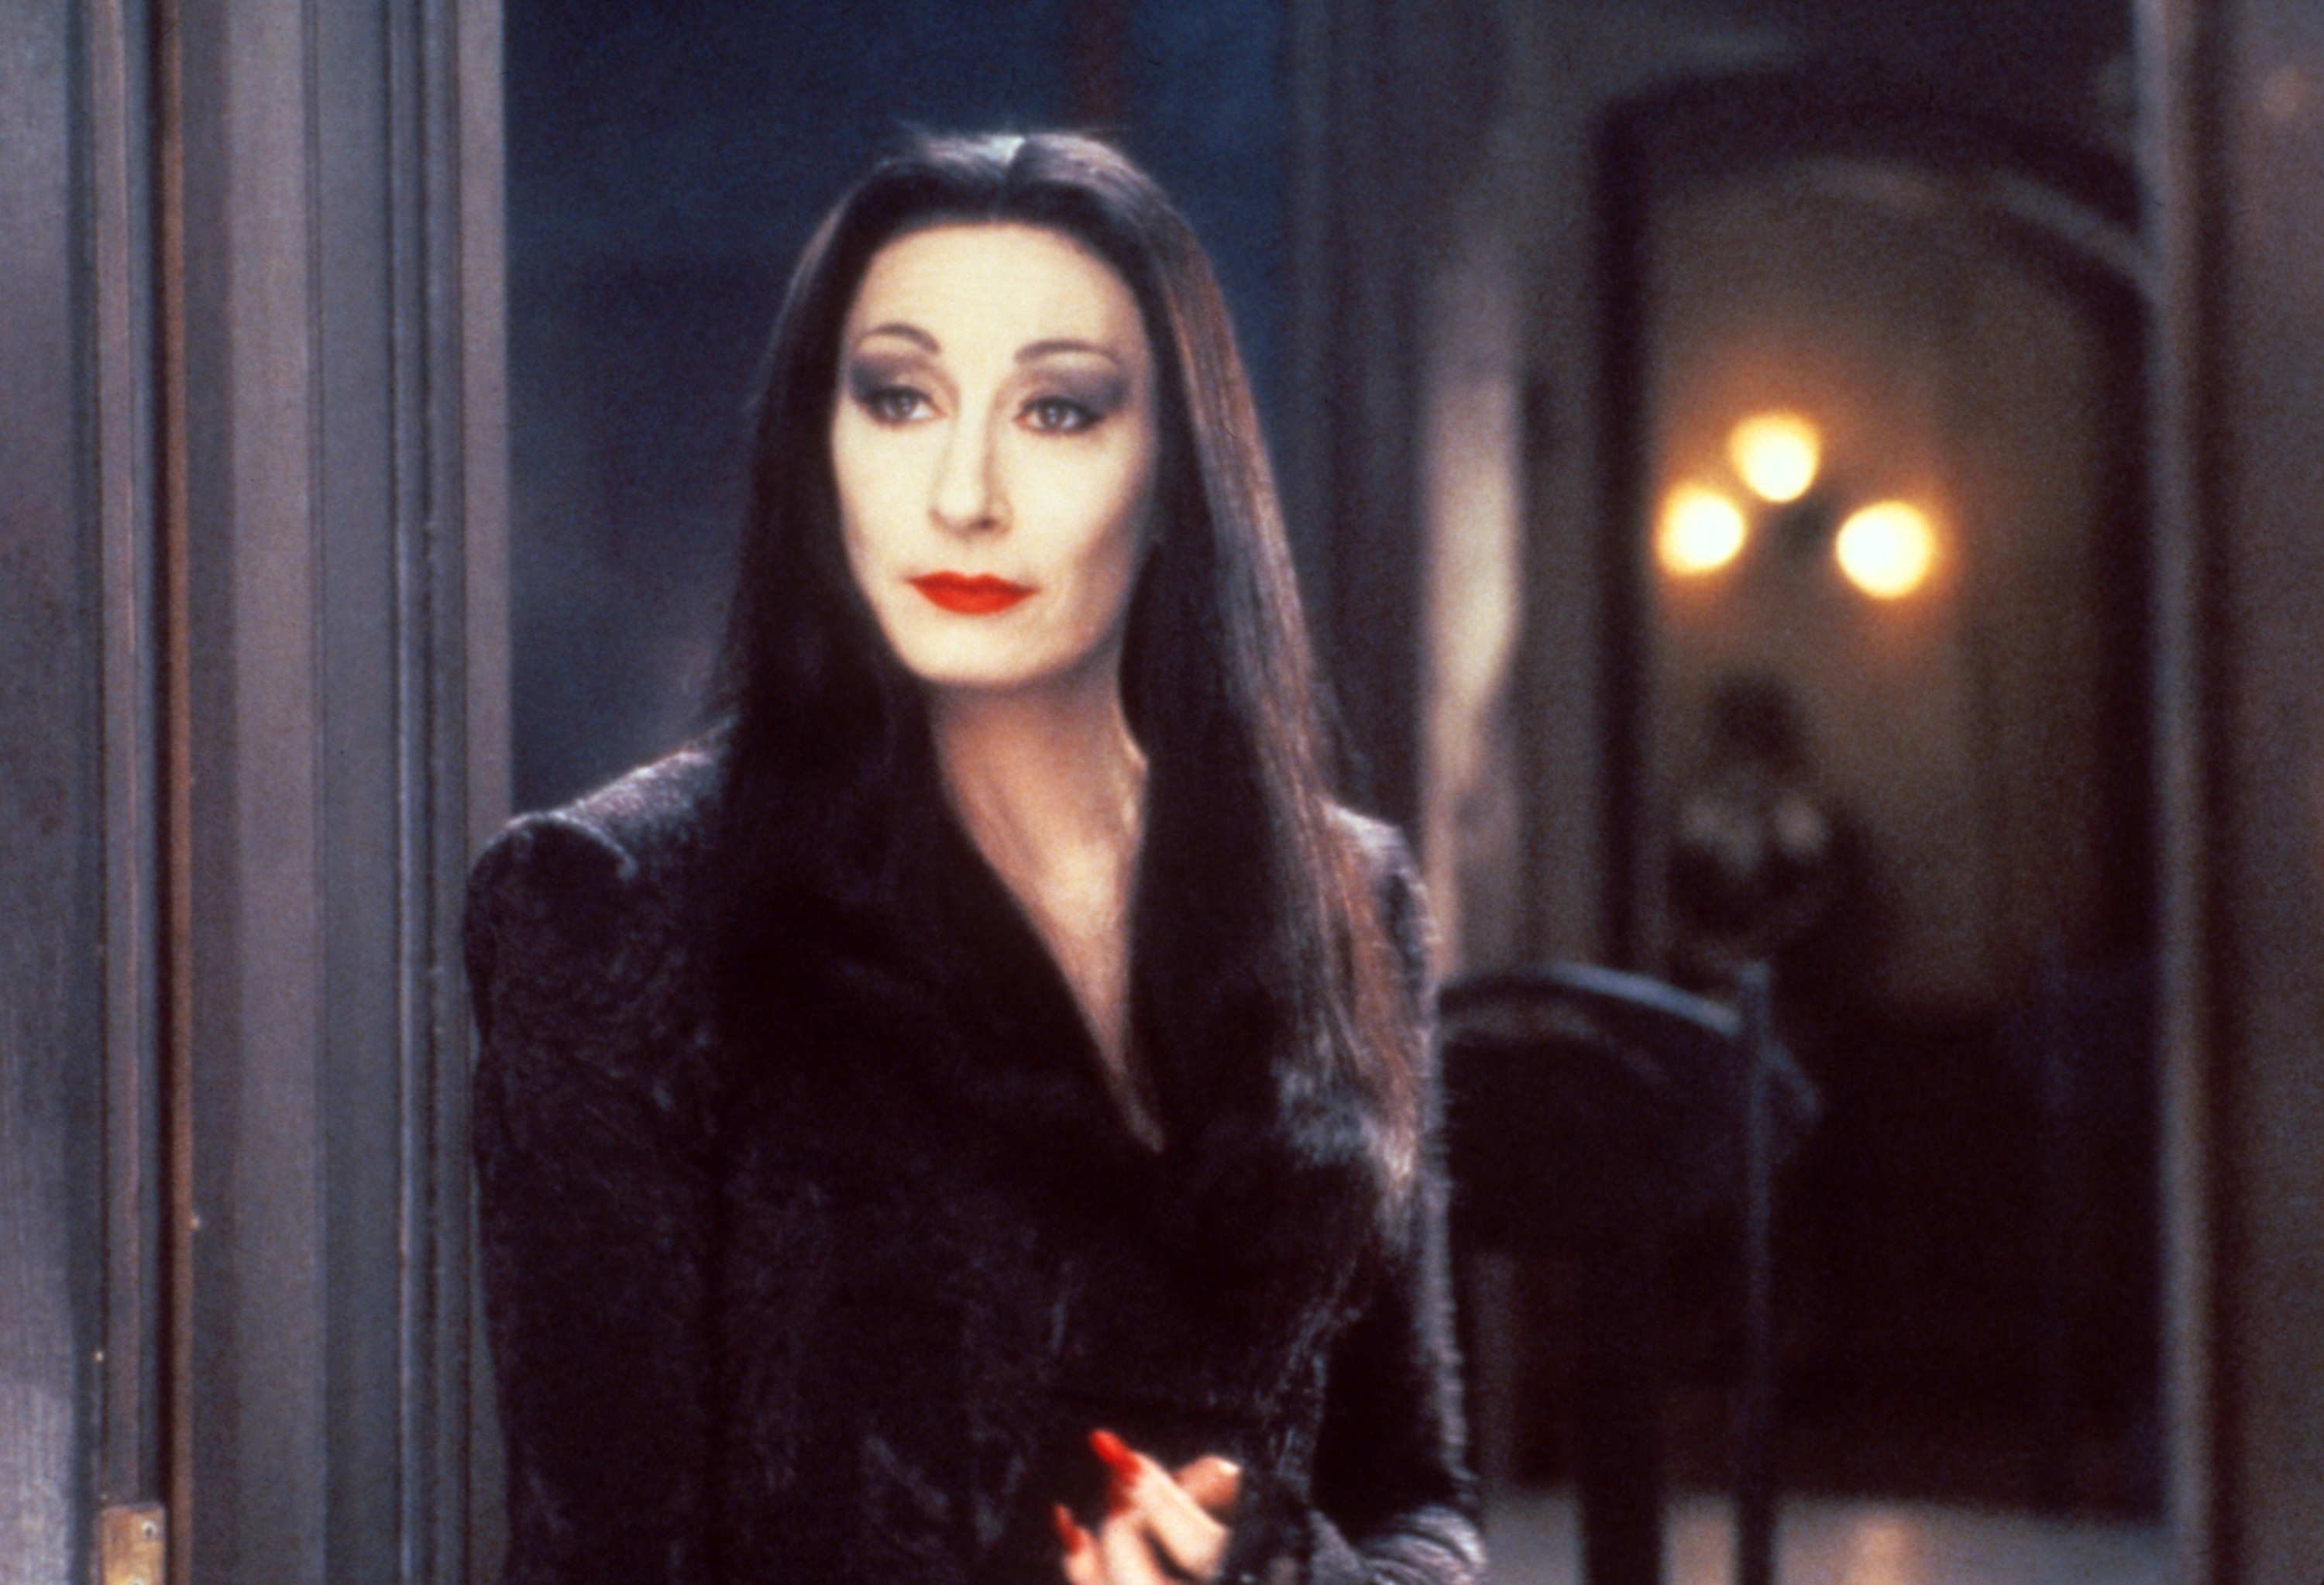 Morticia Addams from &quot;The Addams Family&quot; stands solemnly, dressed in her signature long black dress